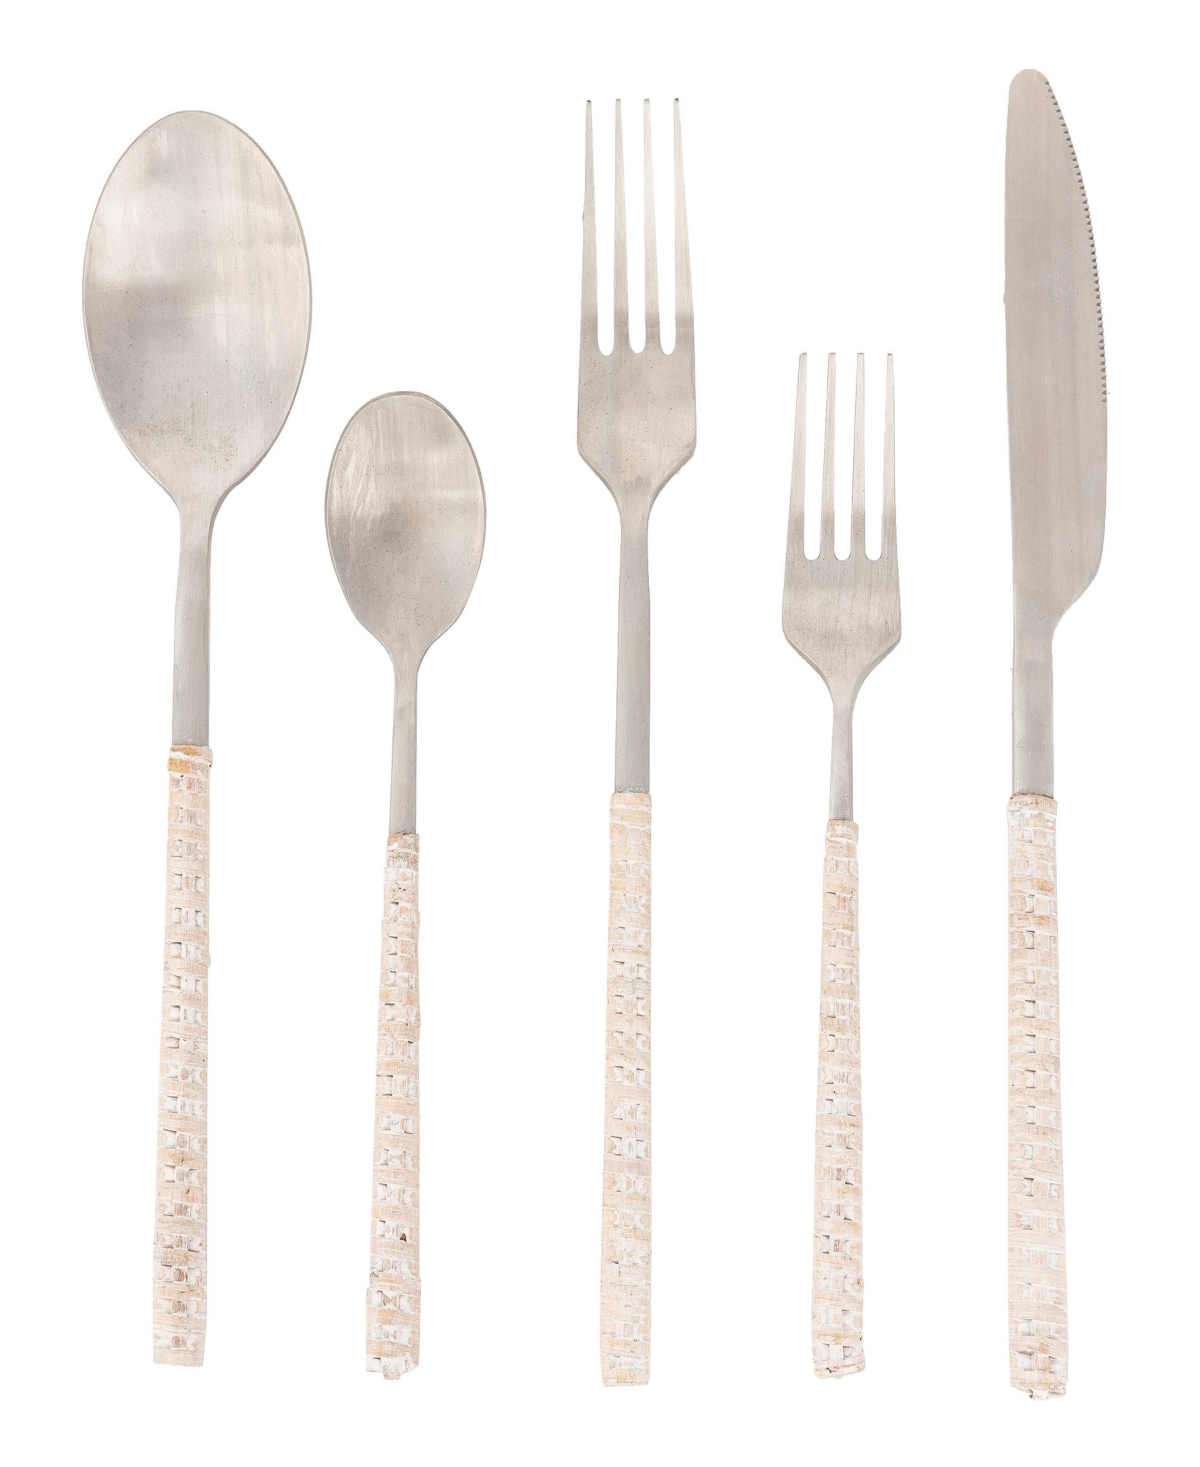 Shop Artifacts Trading Company Rattan Stainless Steel 5 Piece Cutlery Set With Gift Box In White Wash